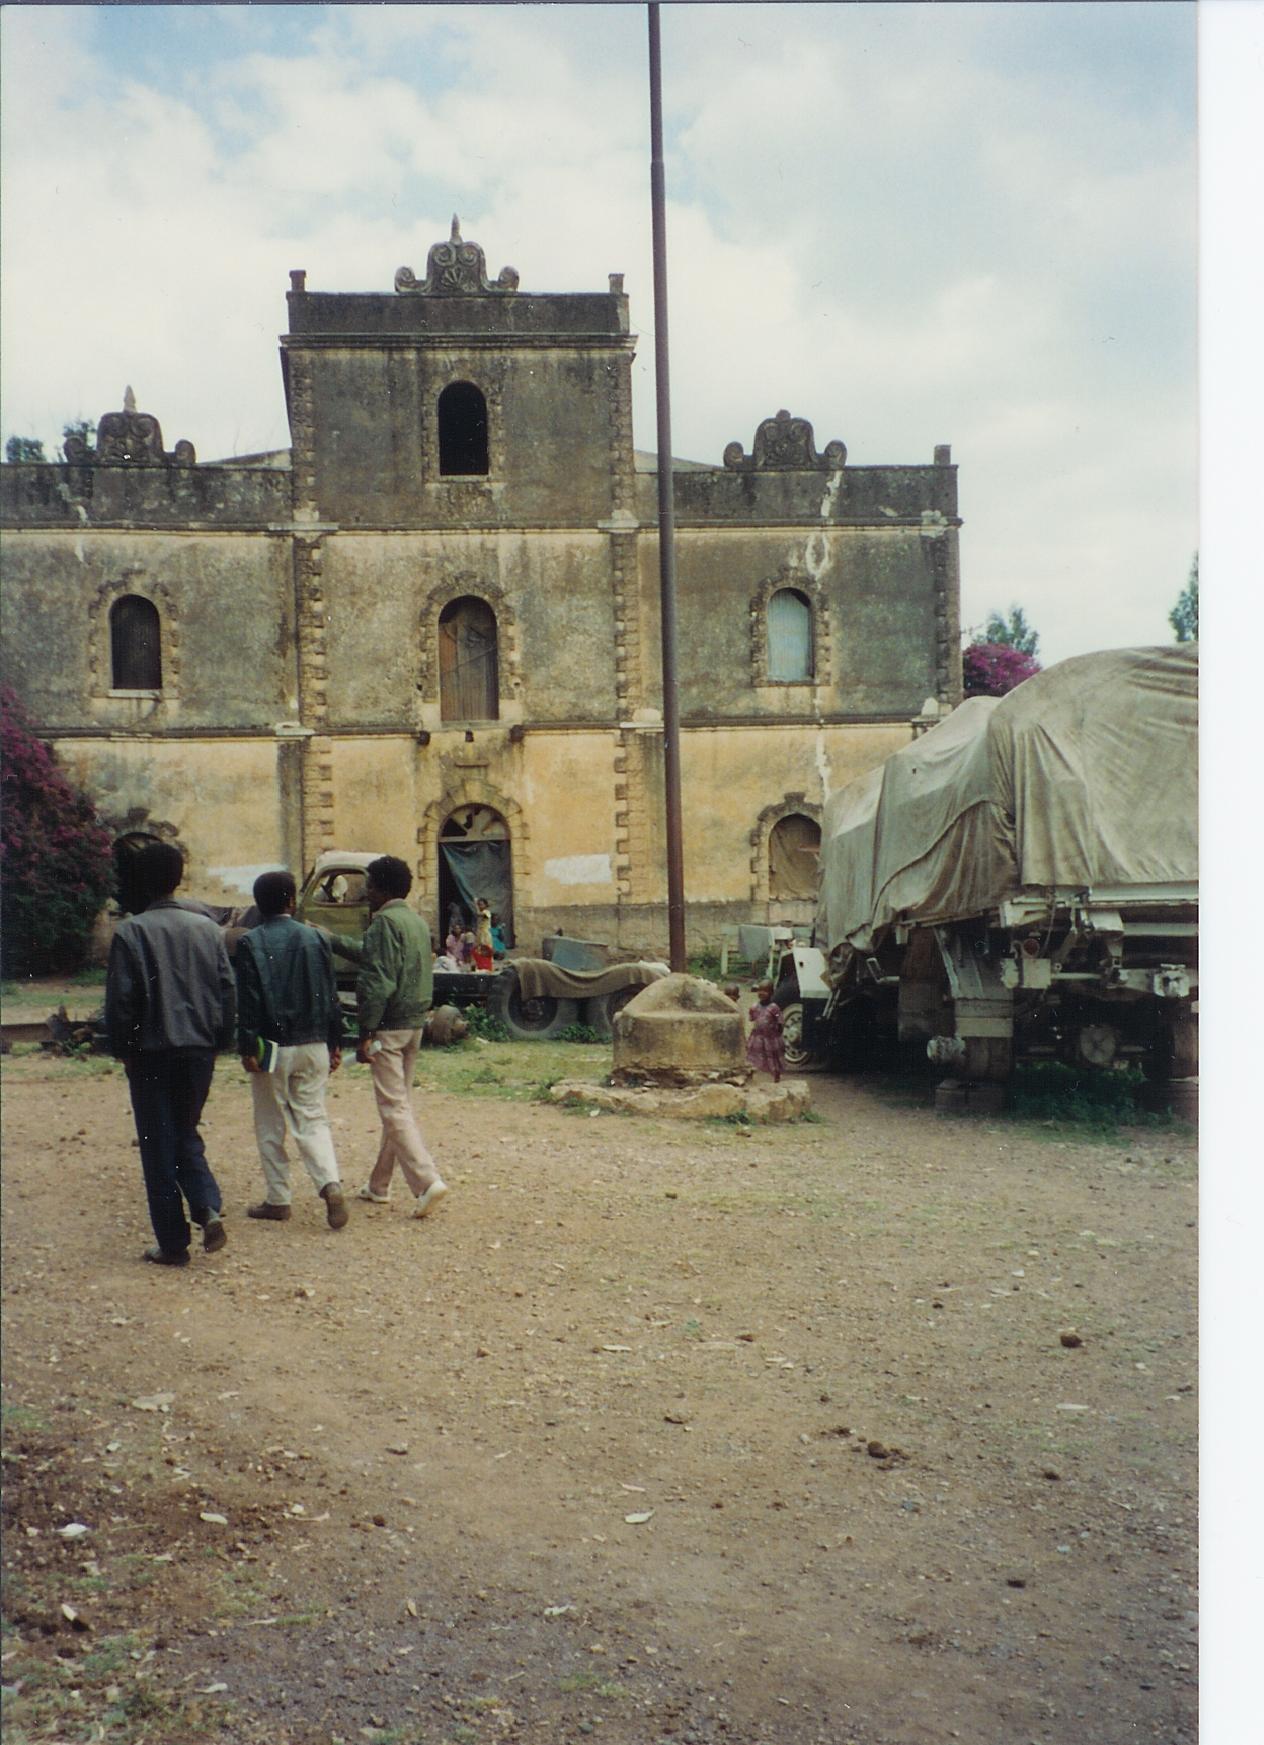  The building had been used by the Derg regime as a military outpost and as well as a prison. Many residents of Axum suffered countless abuses here. 